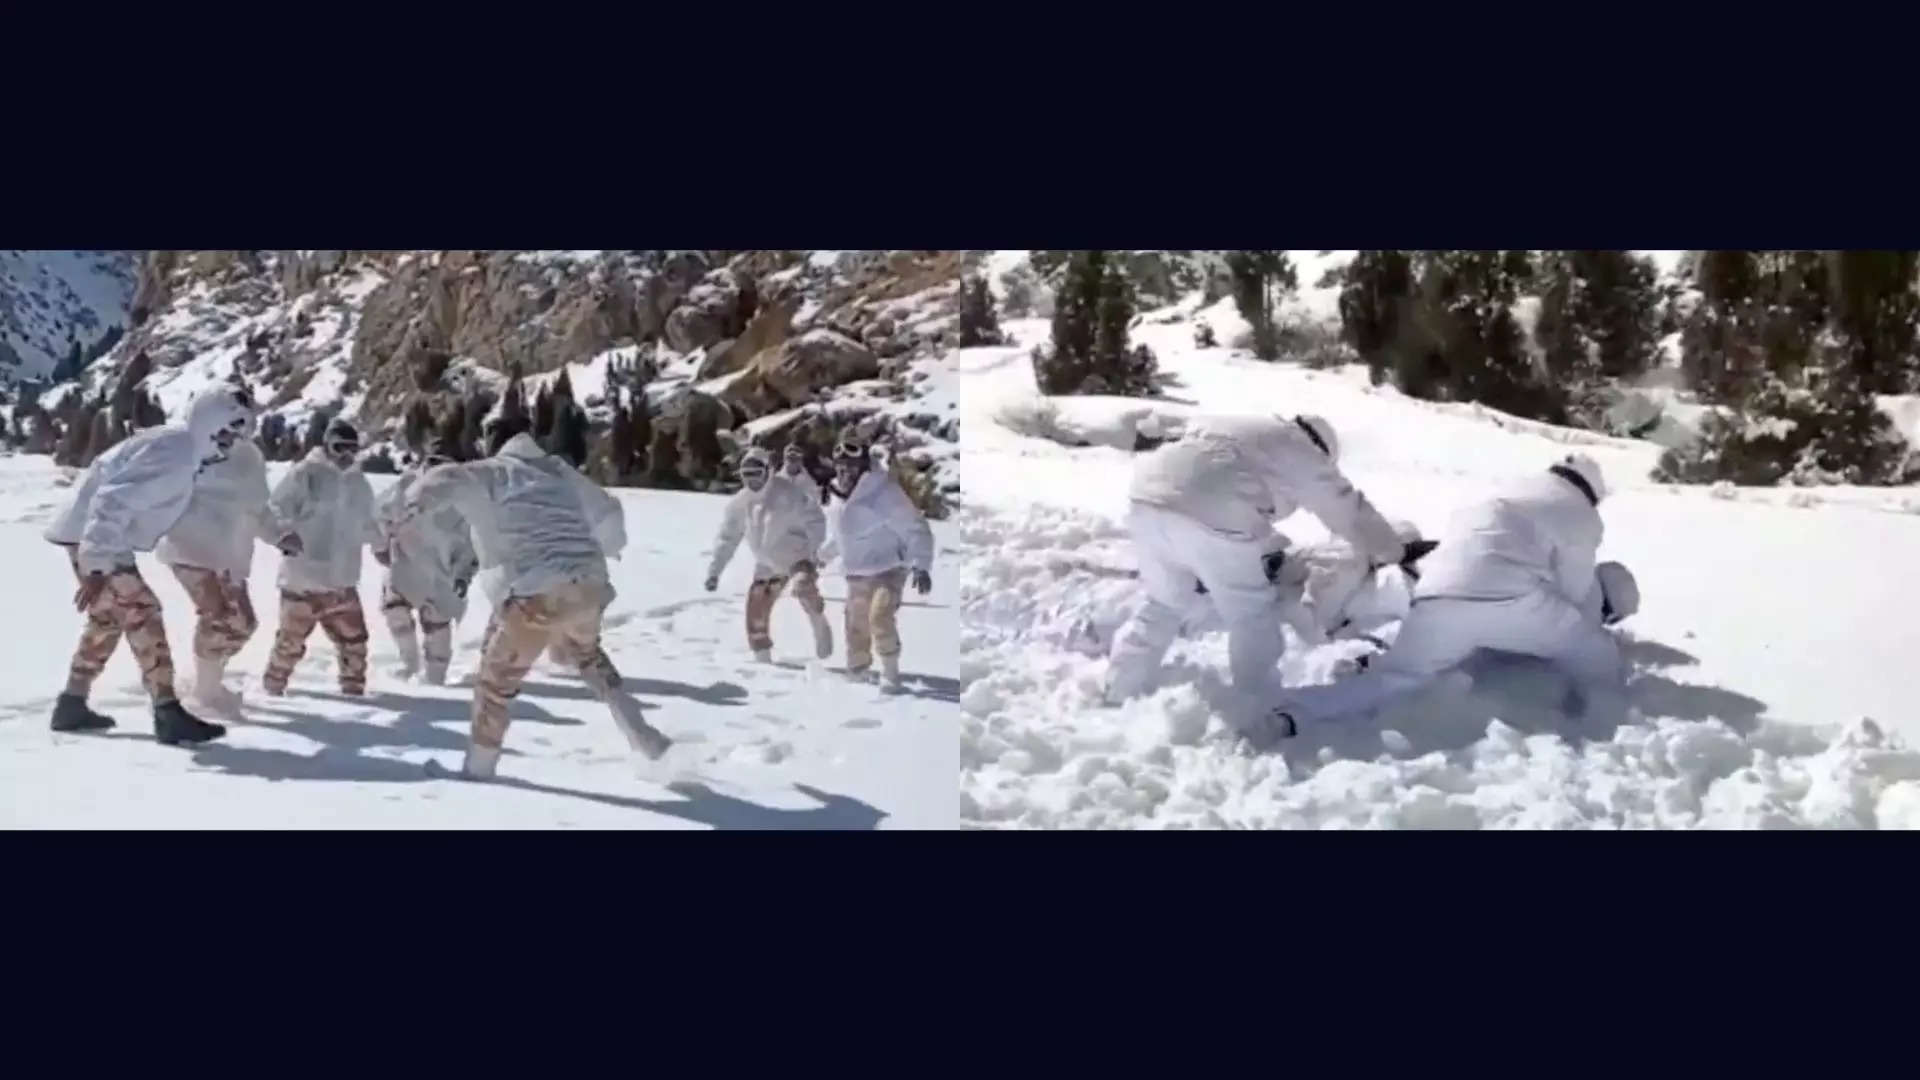 ITBP personnel play Kabaddi on snow